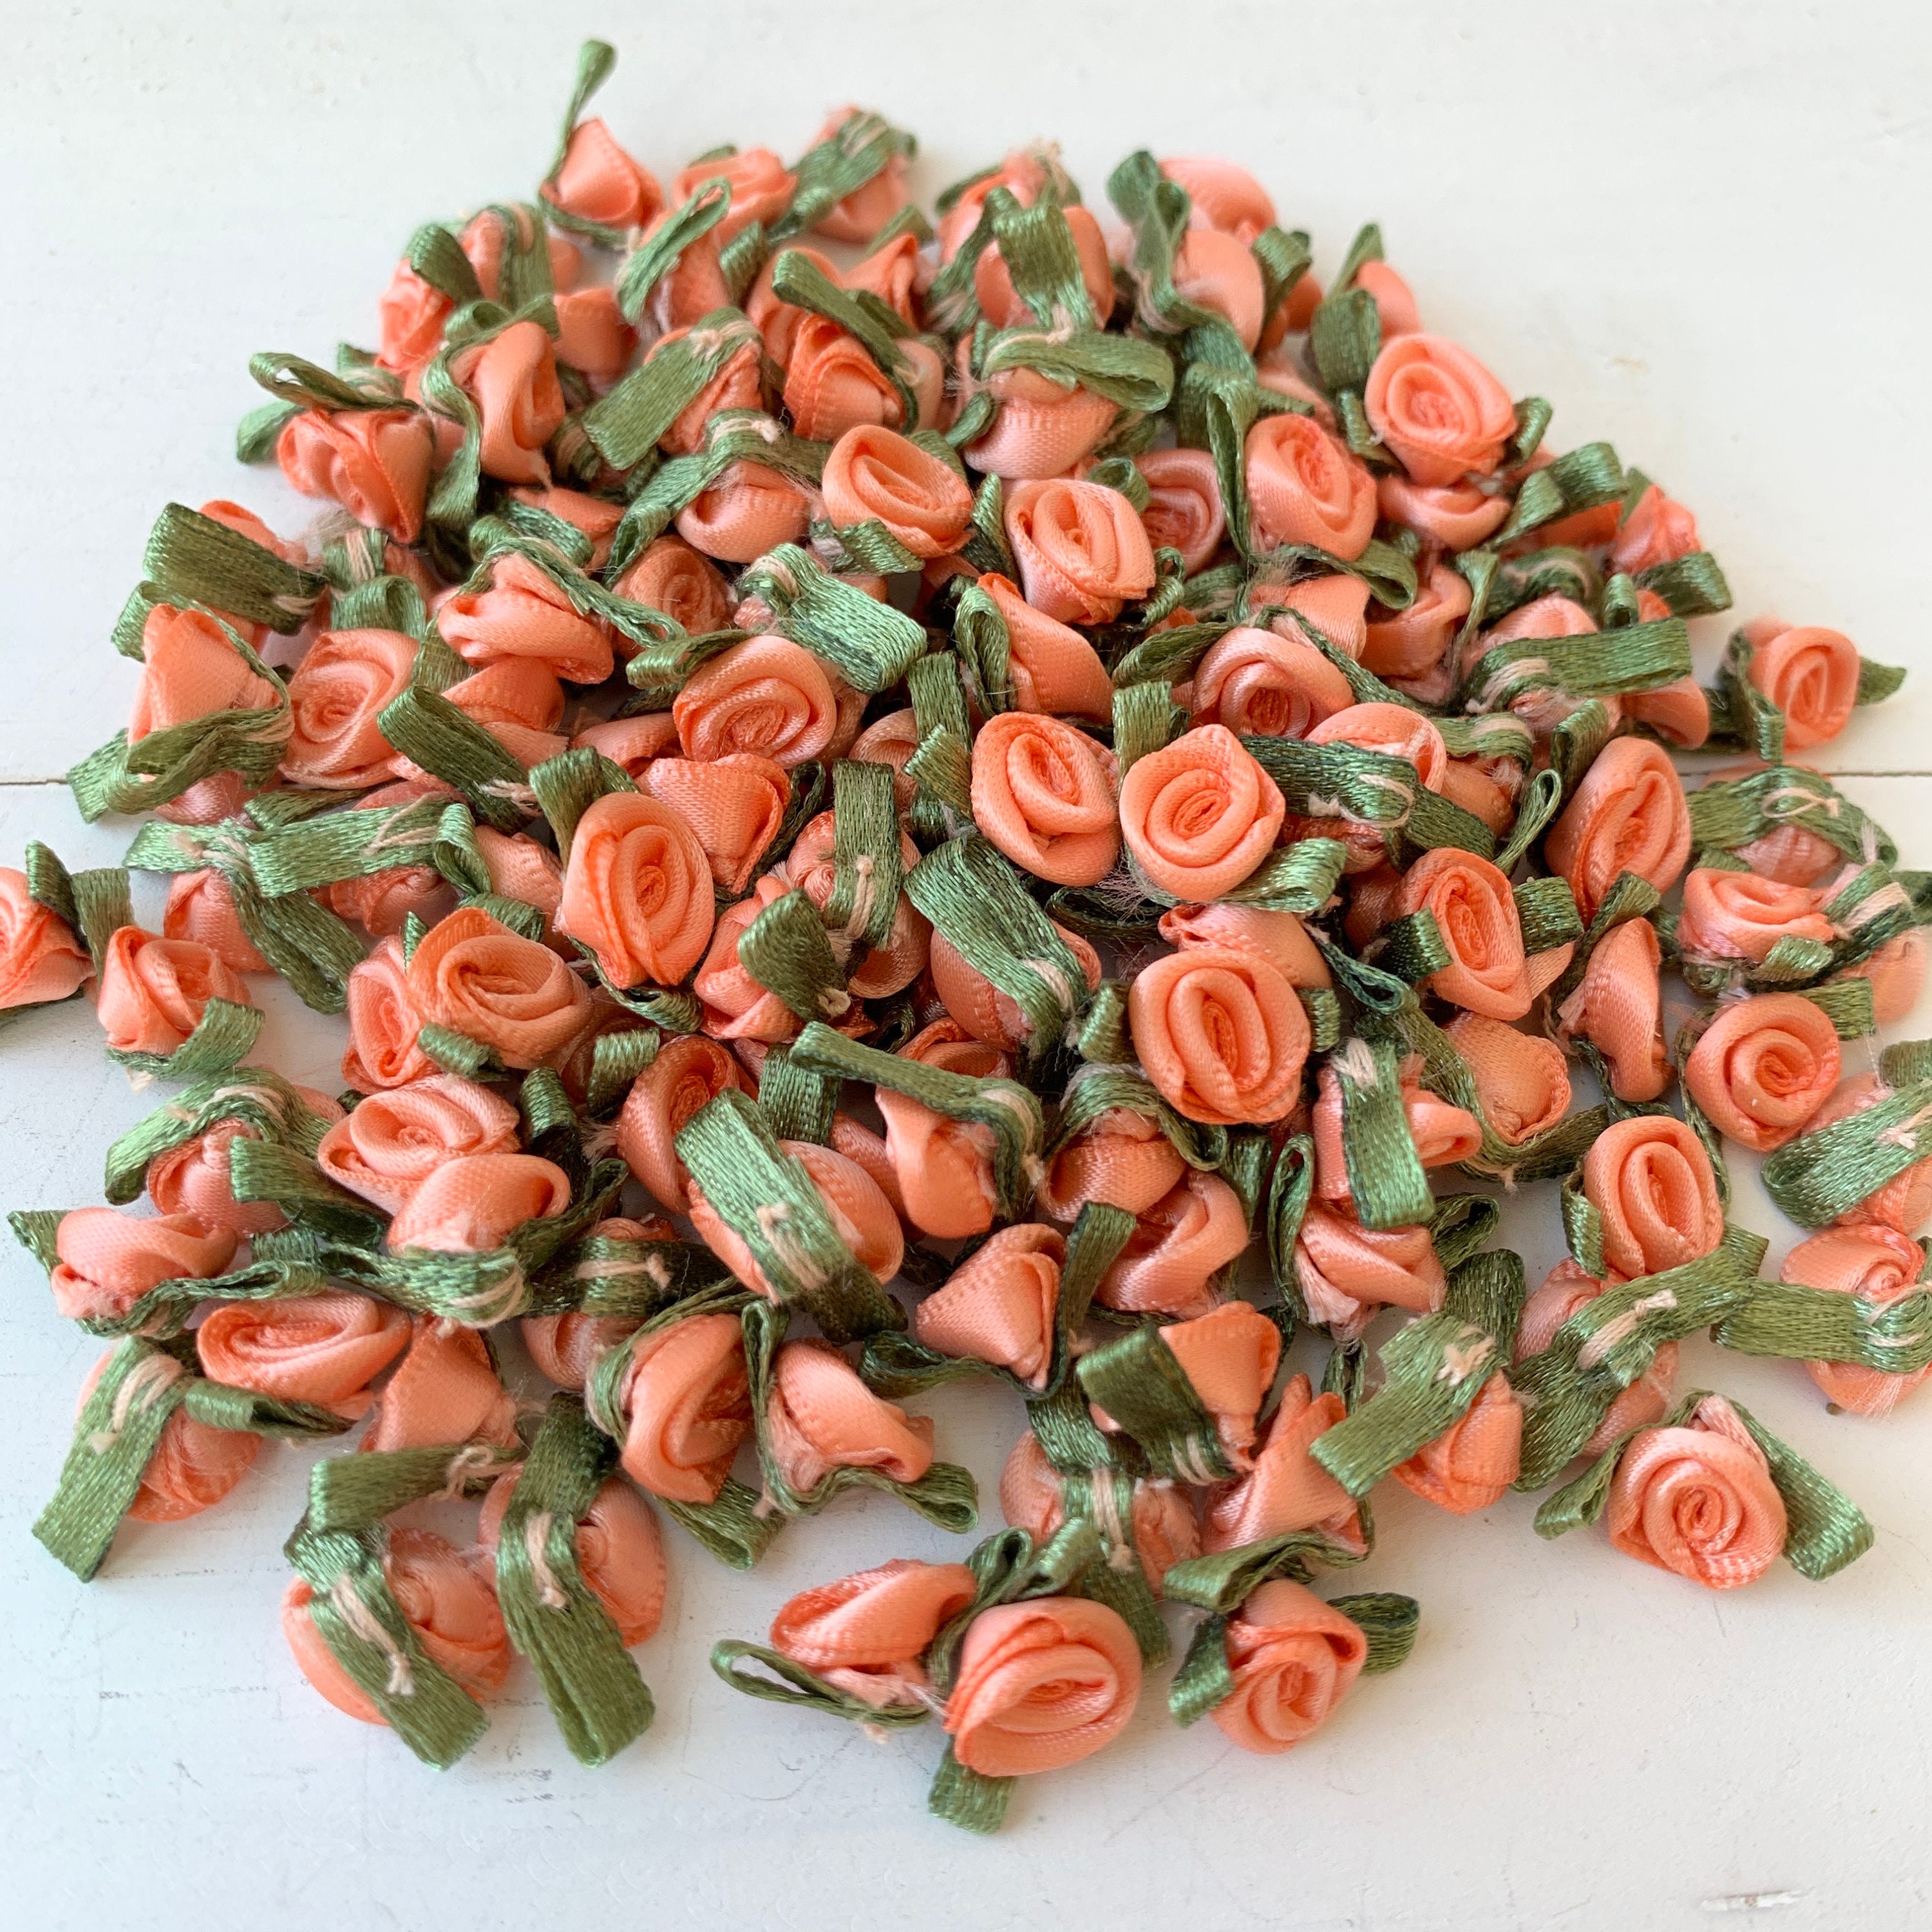 Buy Silk ribbon roses picture Peach roses online